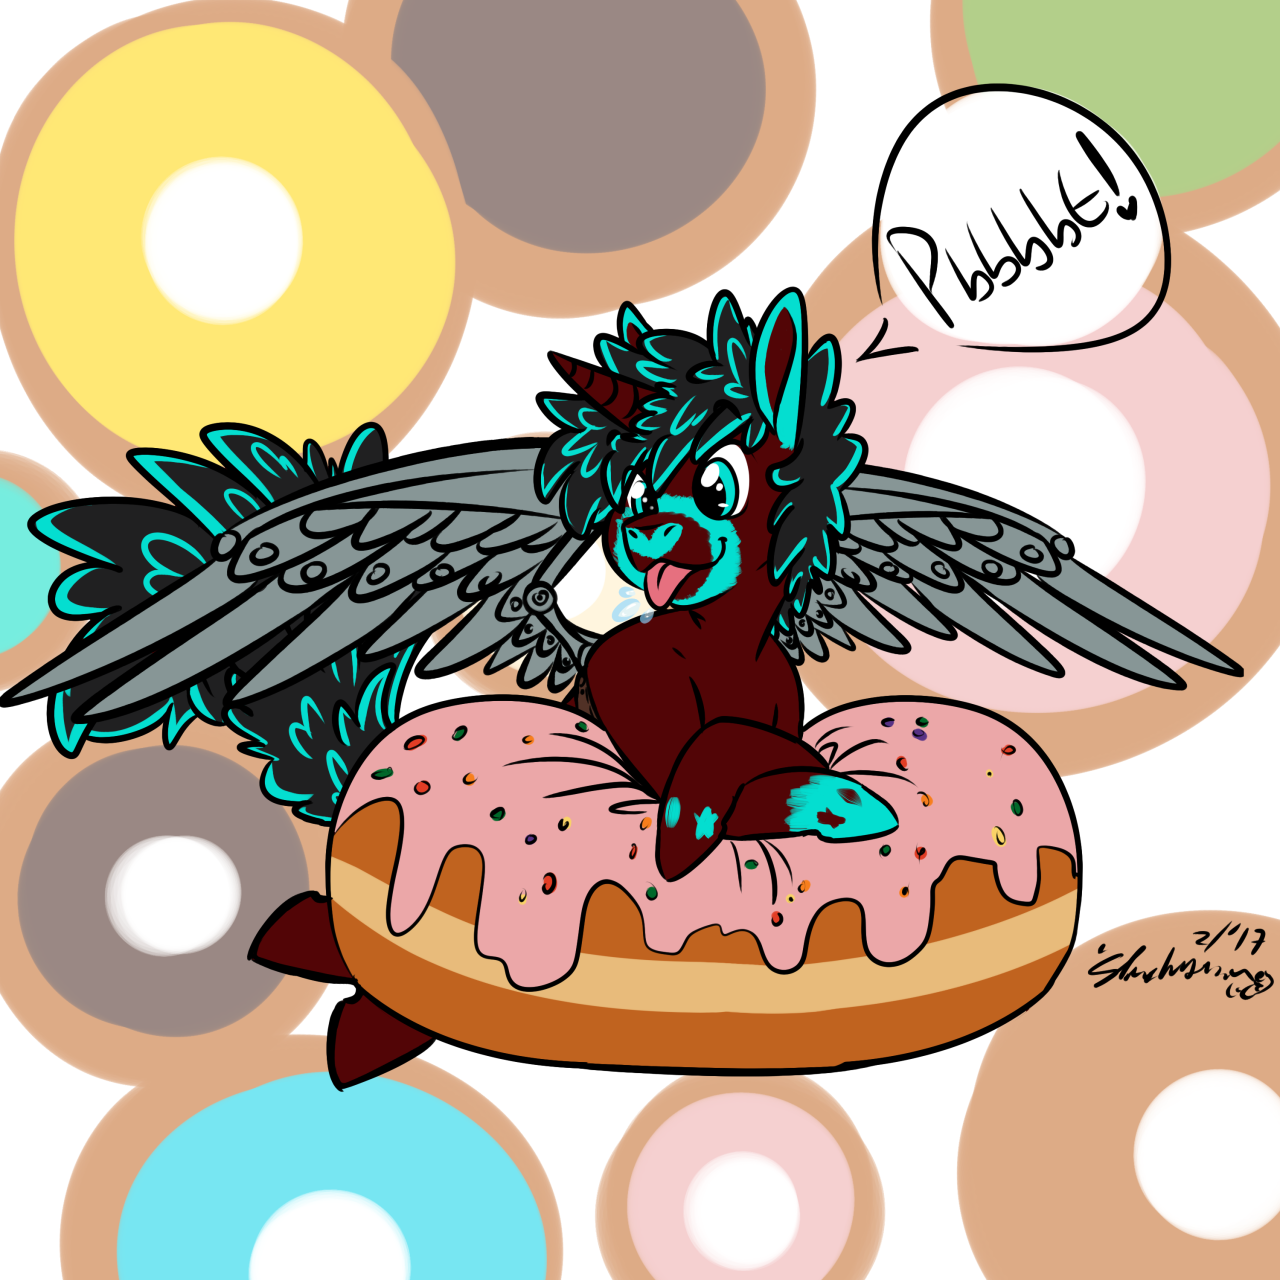 snowydesertfox: Donut pony doodles for my friend @askug and for another friend who